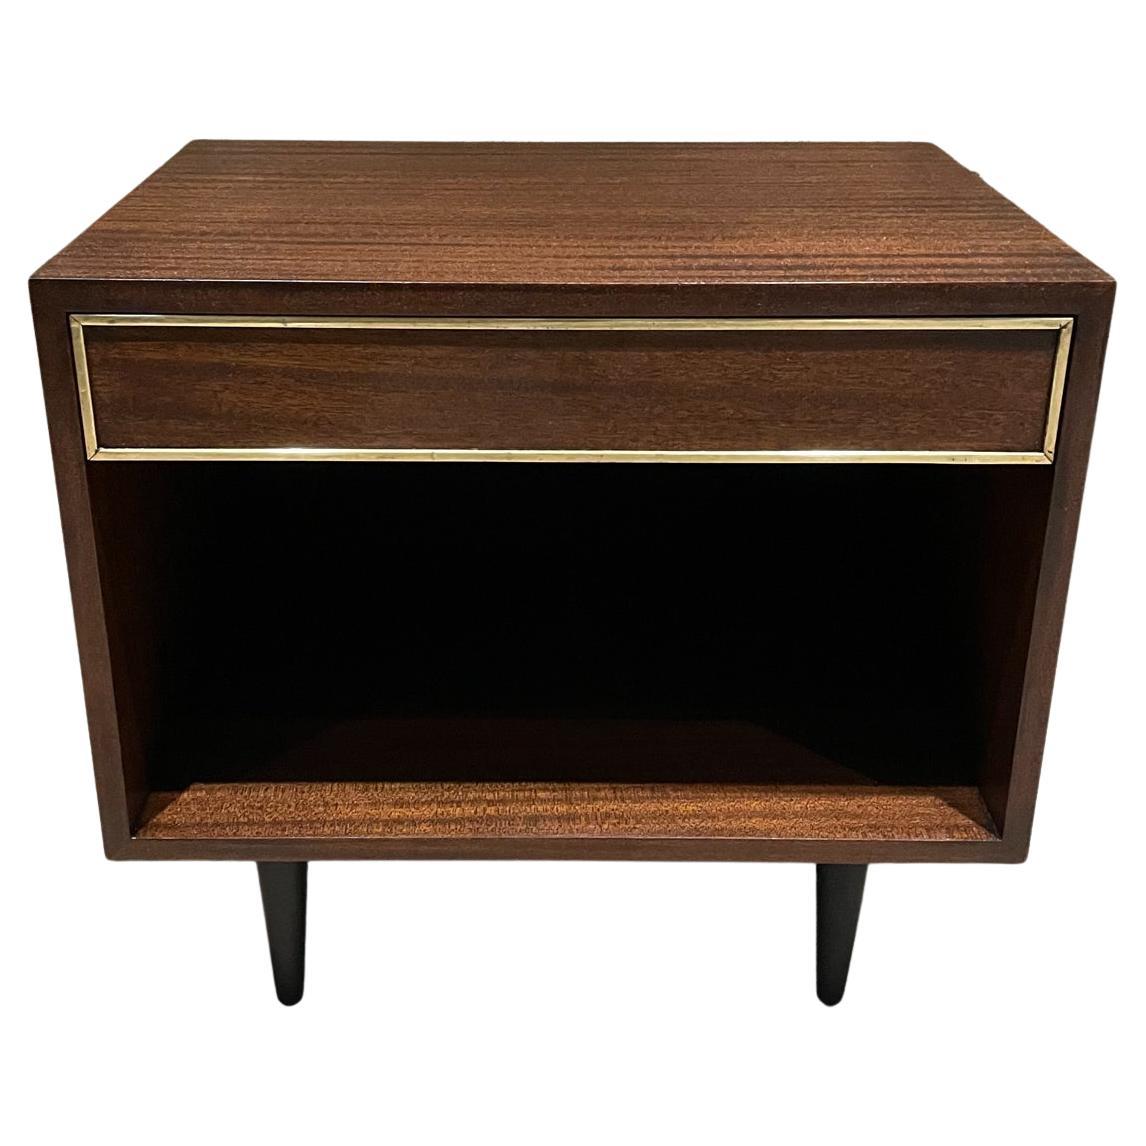 Harvey Probber Sophisticated Modern Mahogany Nightstand 1950s Fall River, Mass